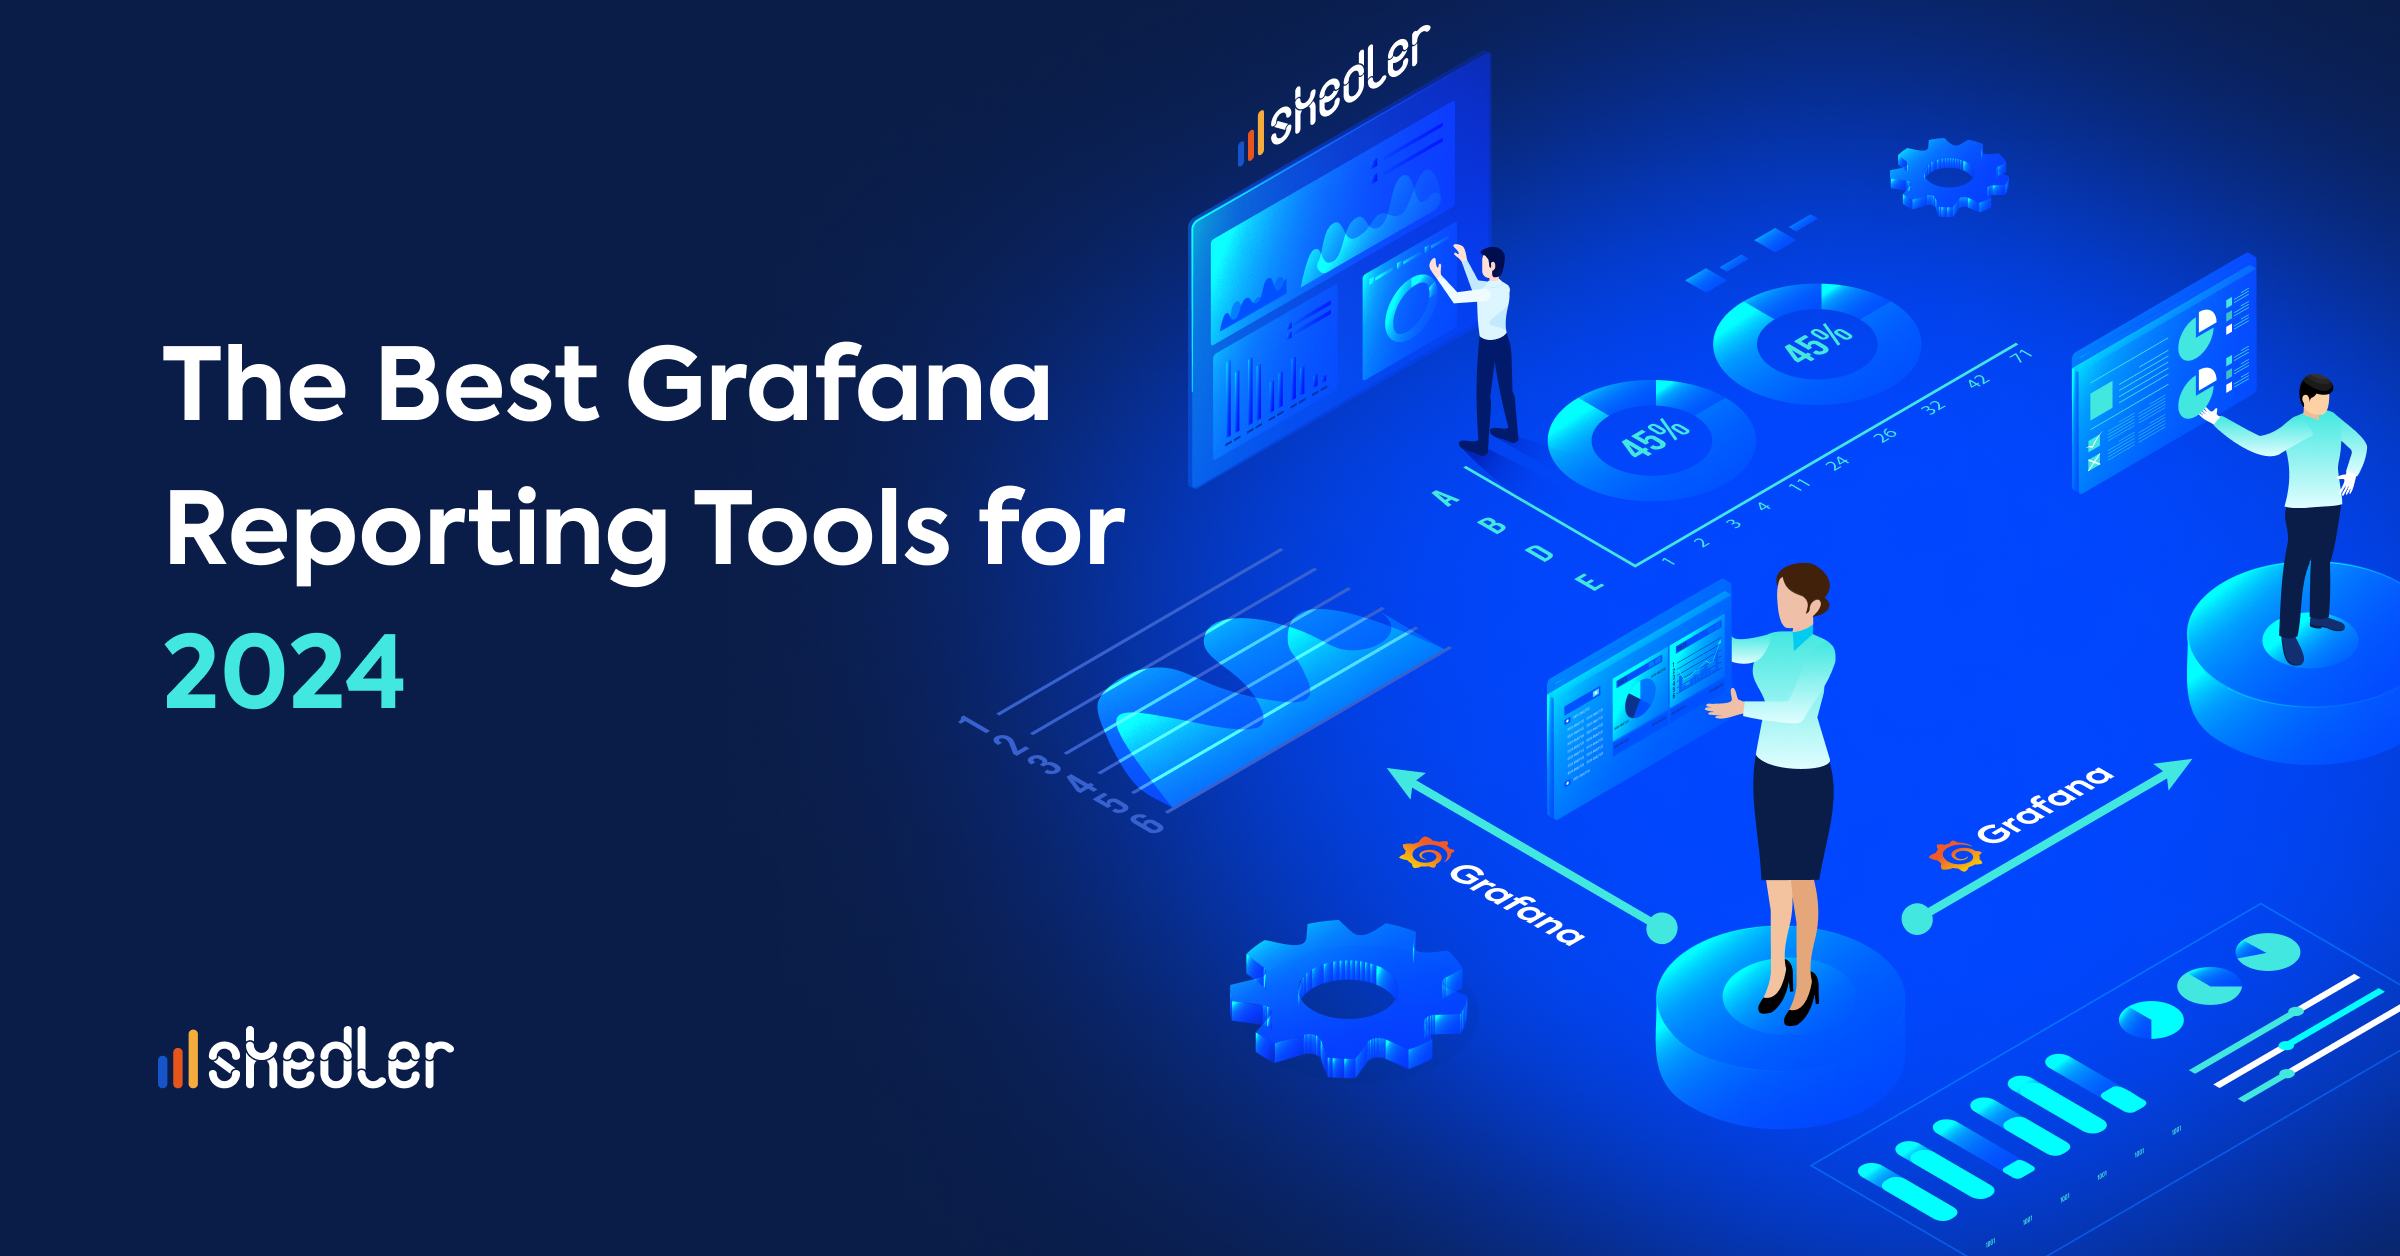 he Best Grafana Reporting Tools for 2024